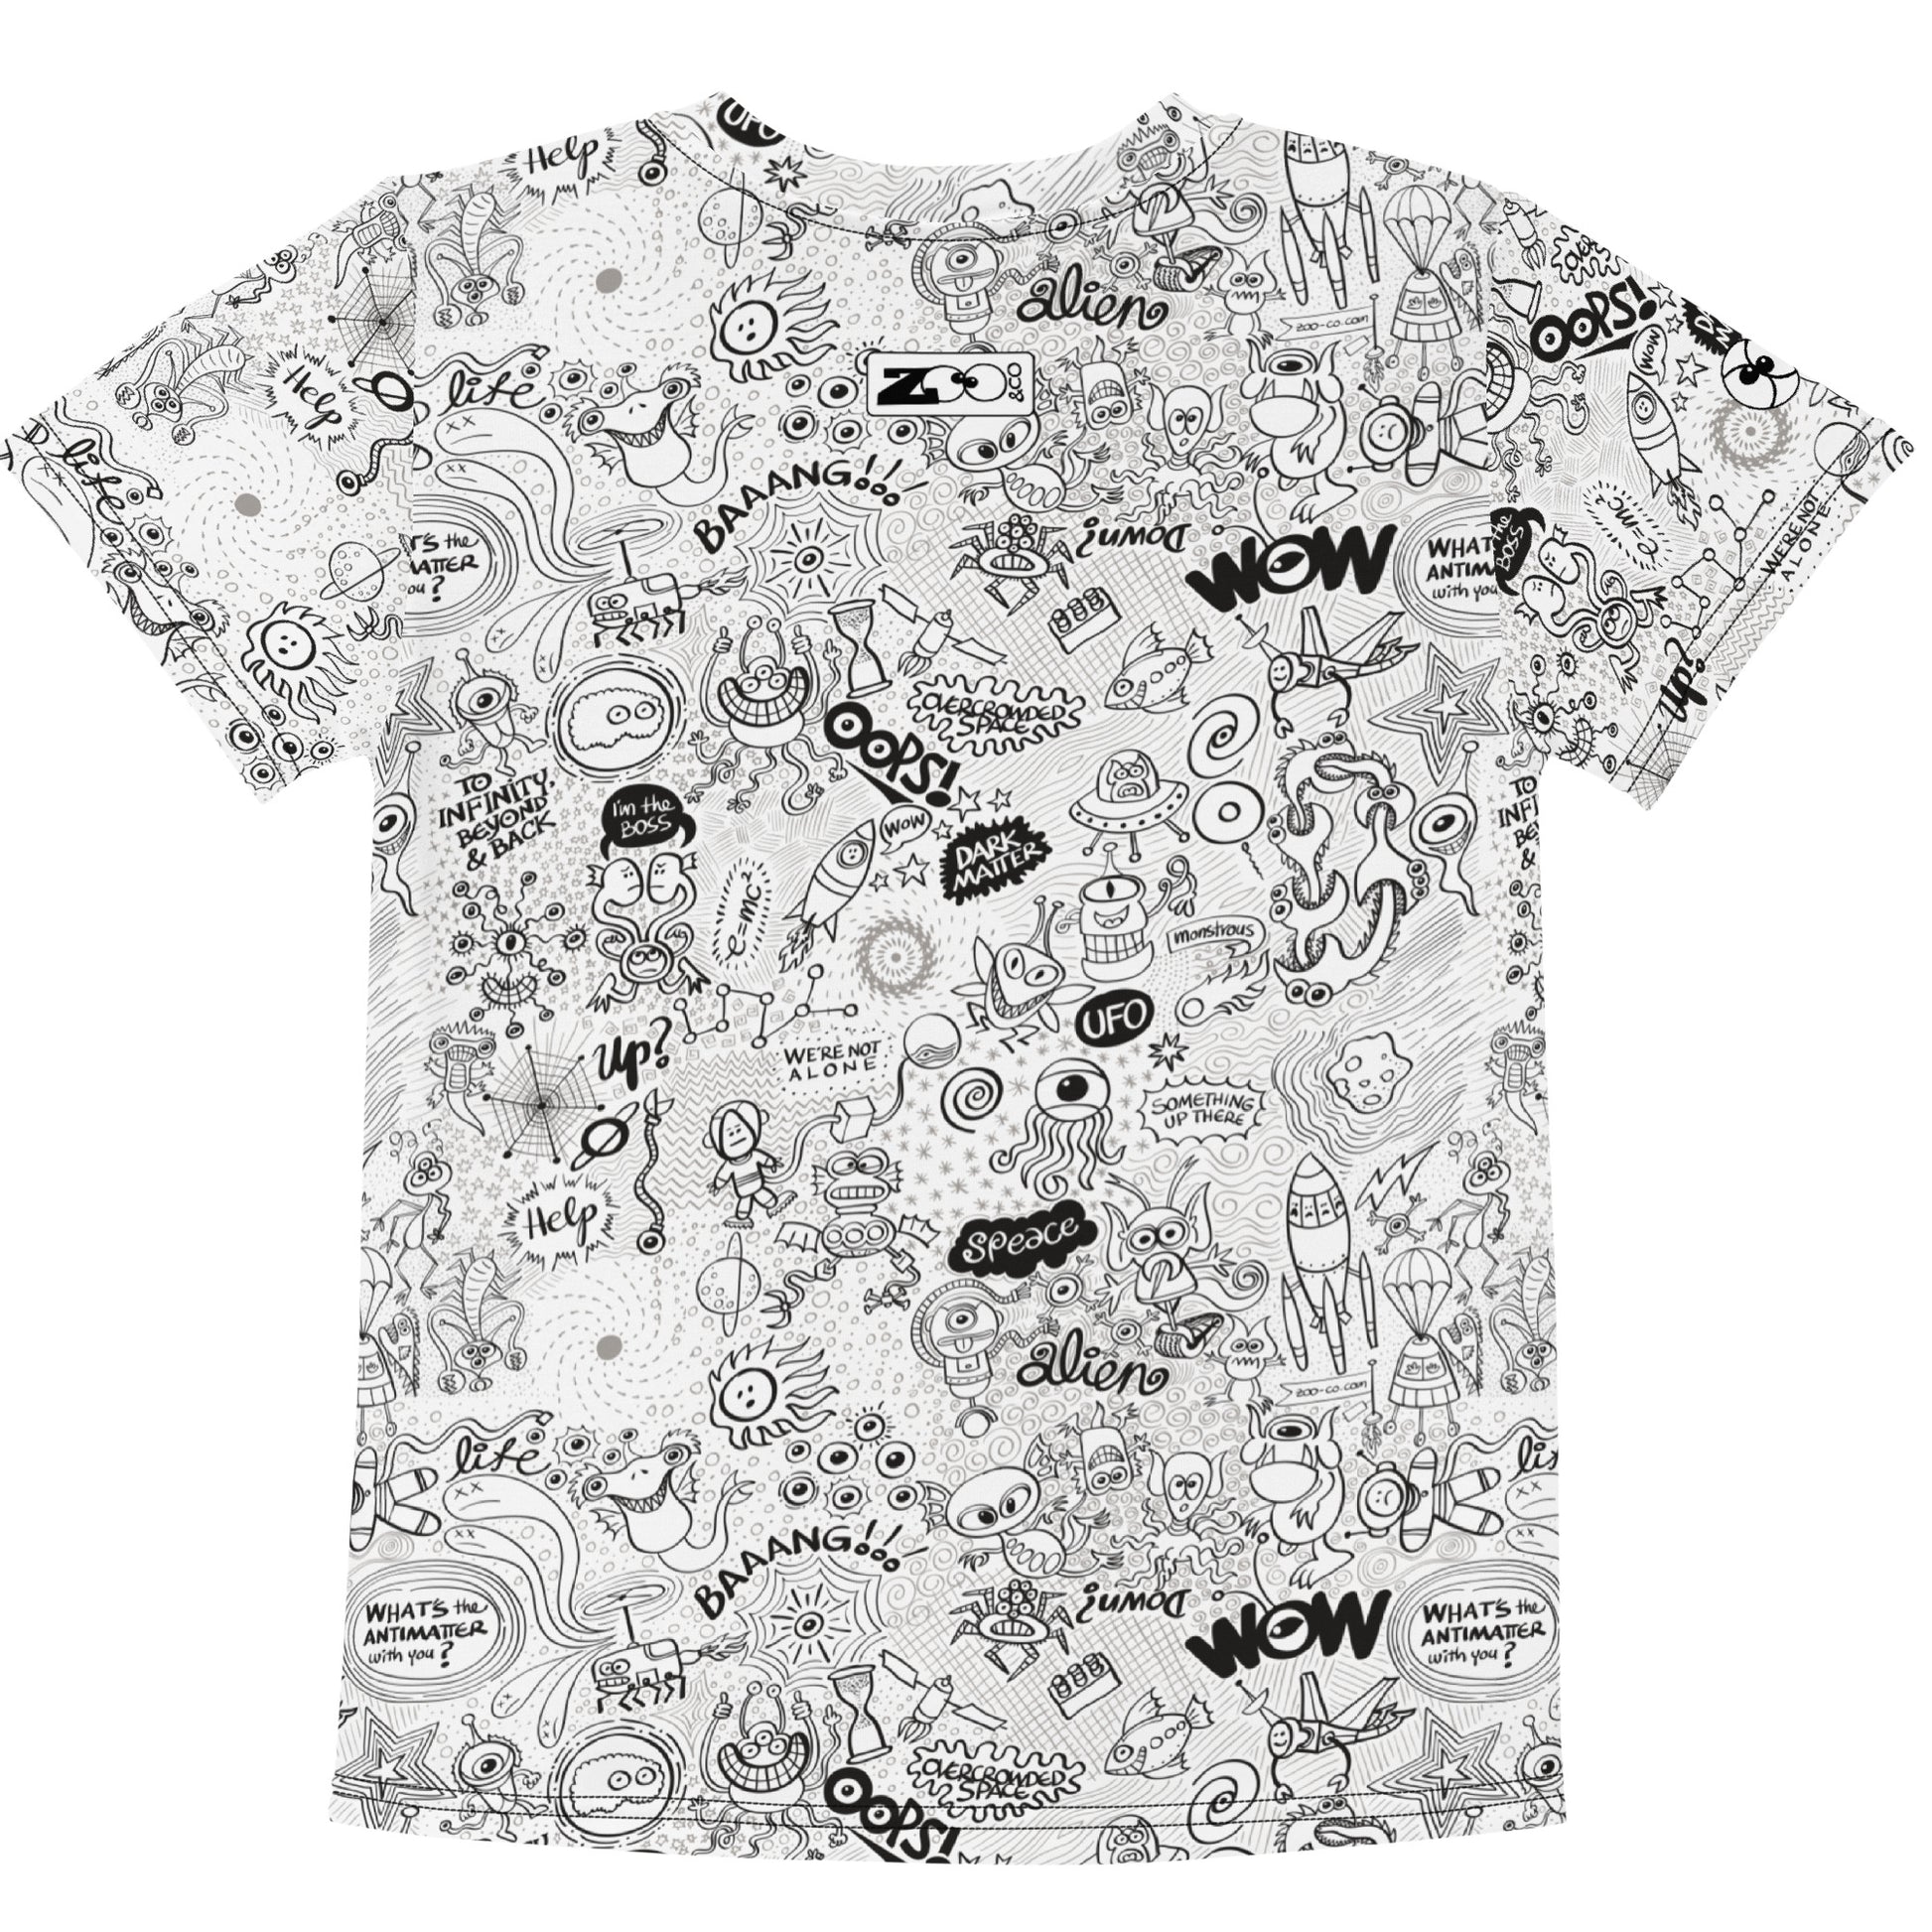 Celebrating the most comprehensive Doodle art of the universe Kids crew neck t-shirt. Back view